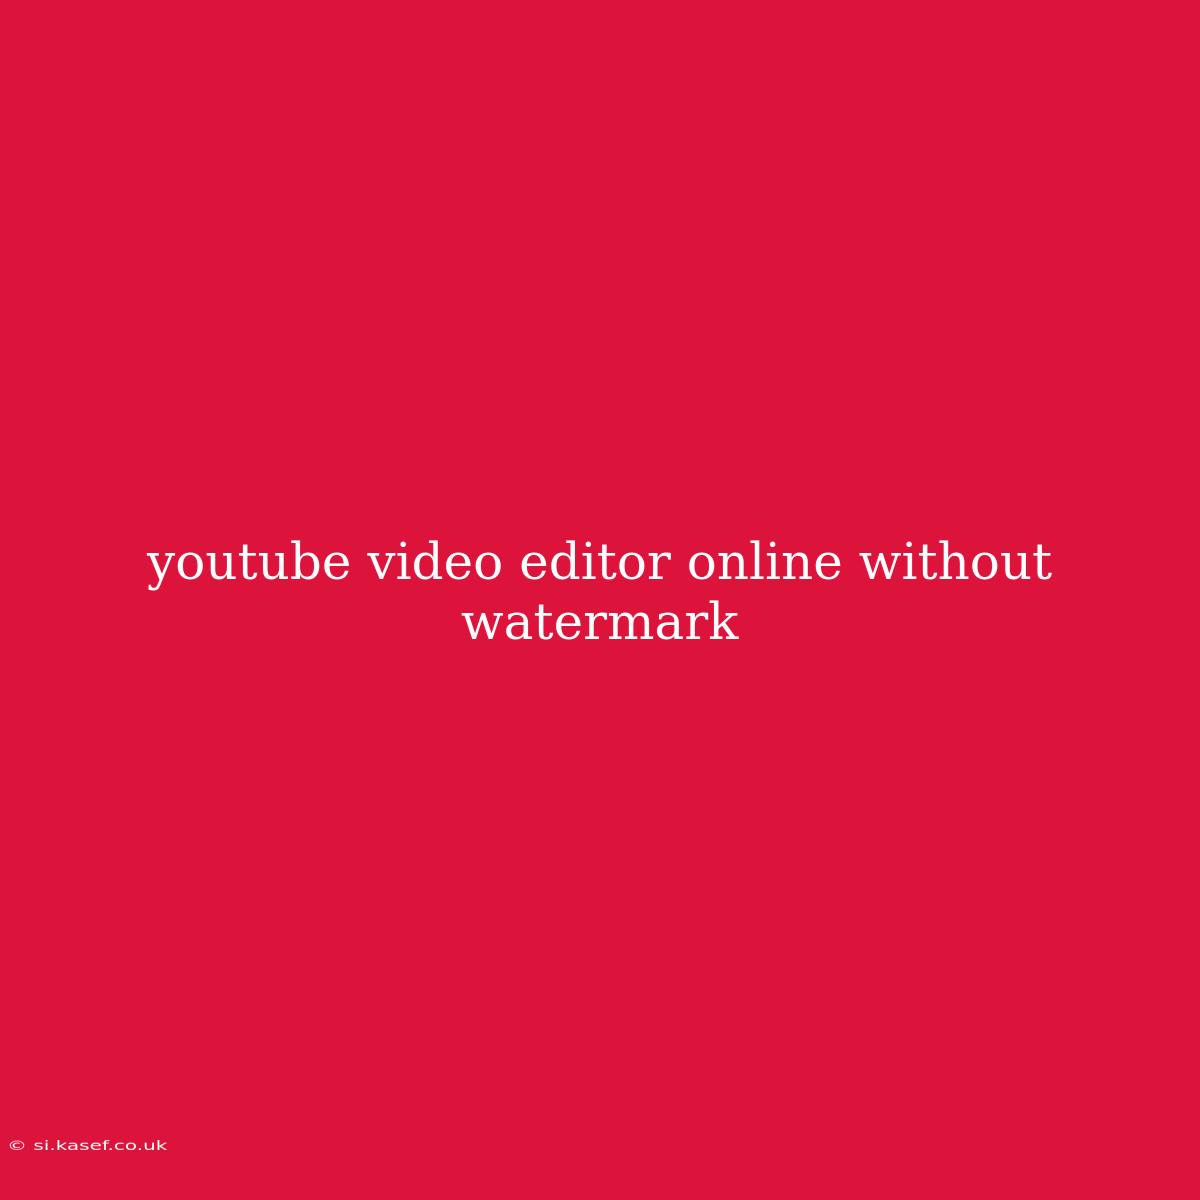 Youtube Video Editor Online Without Watermark